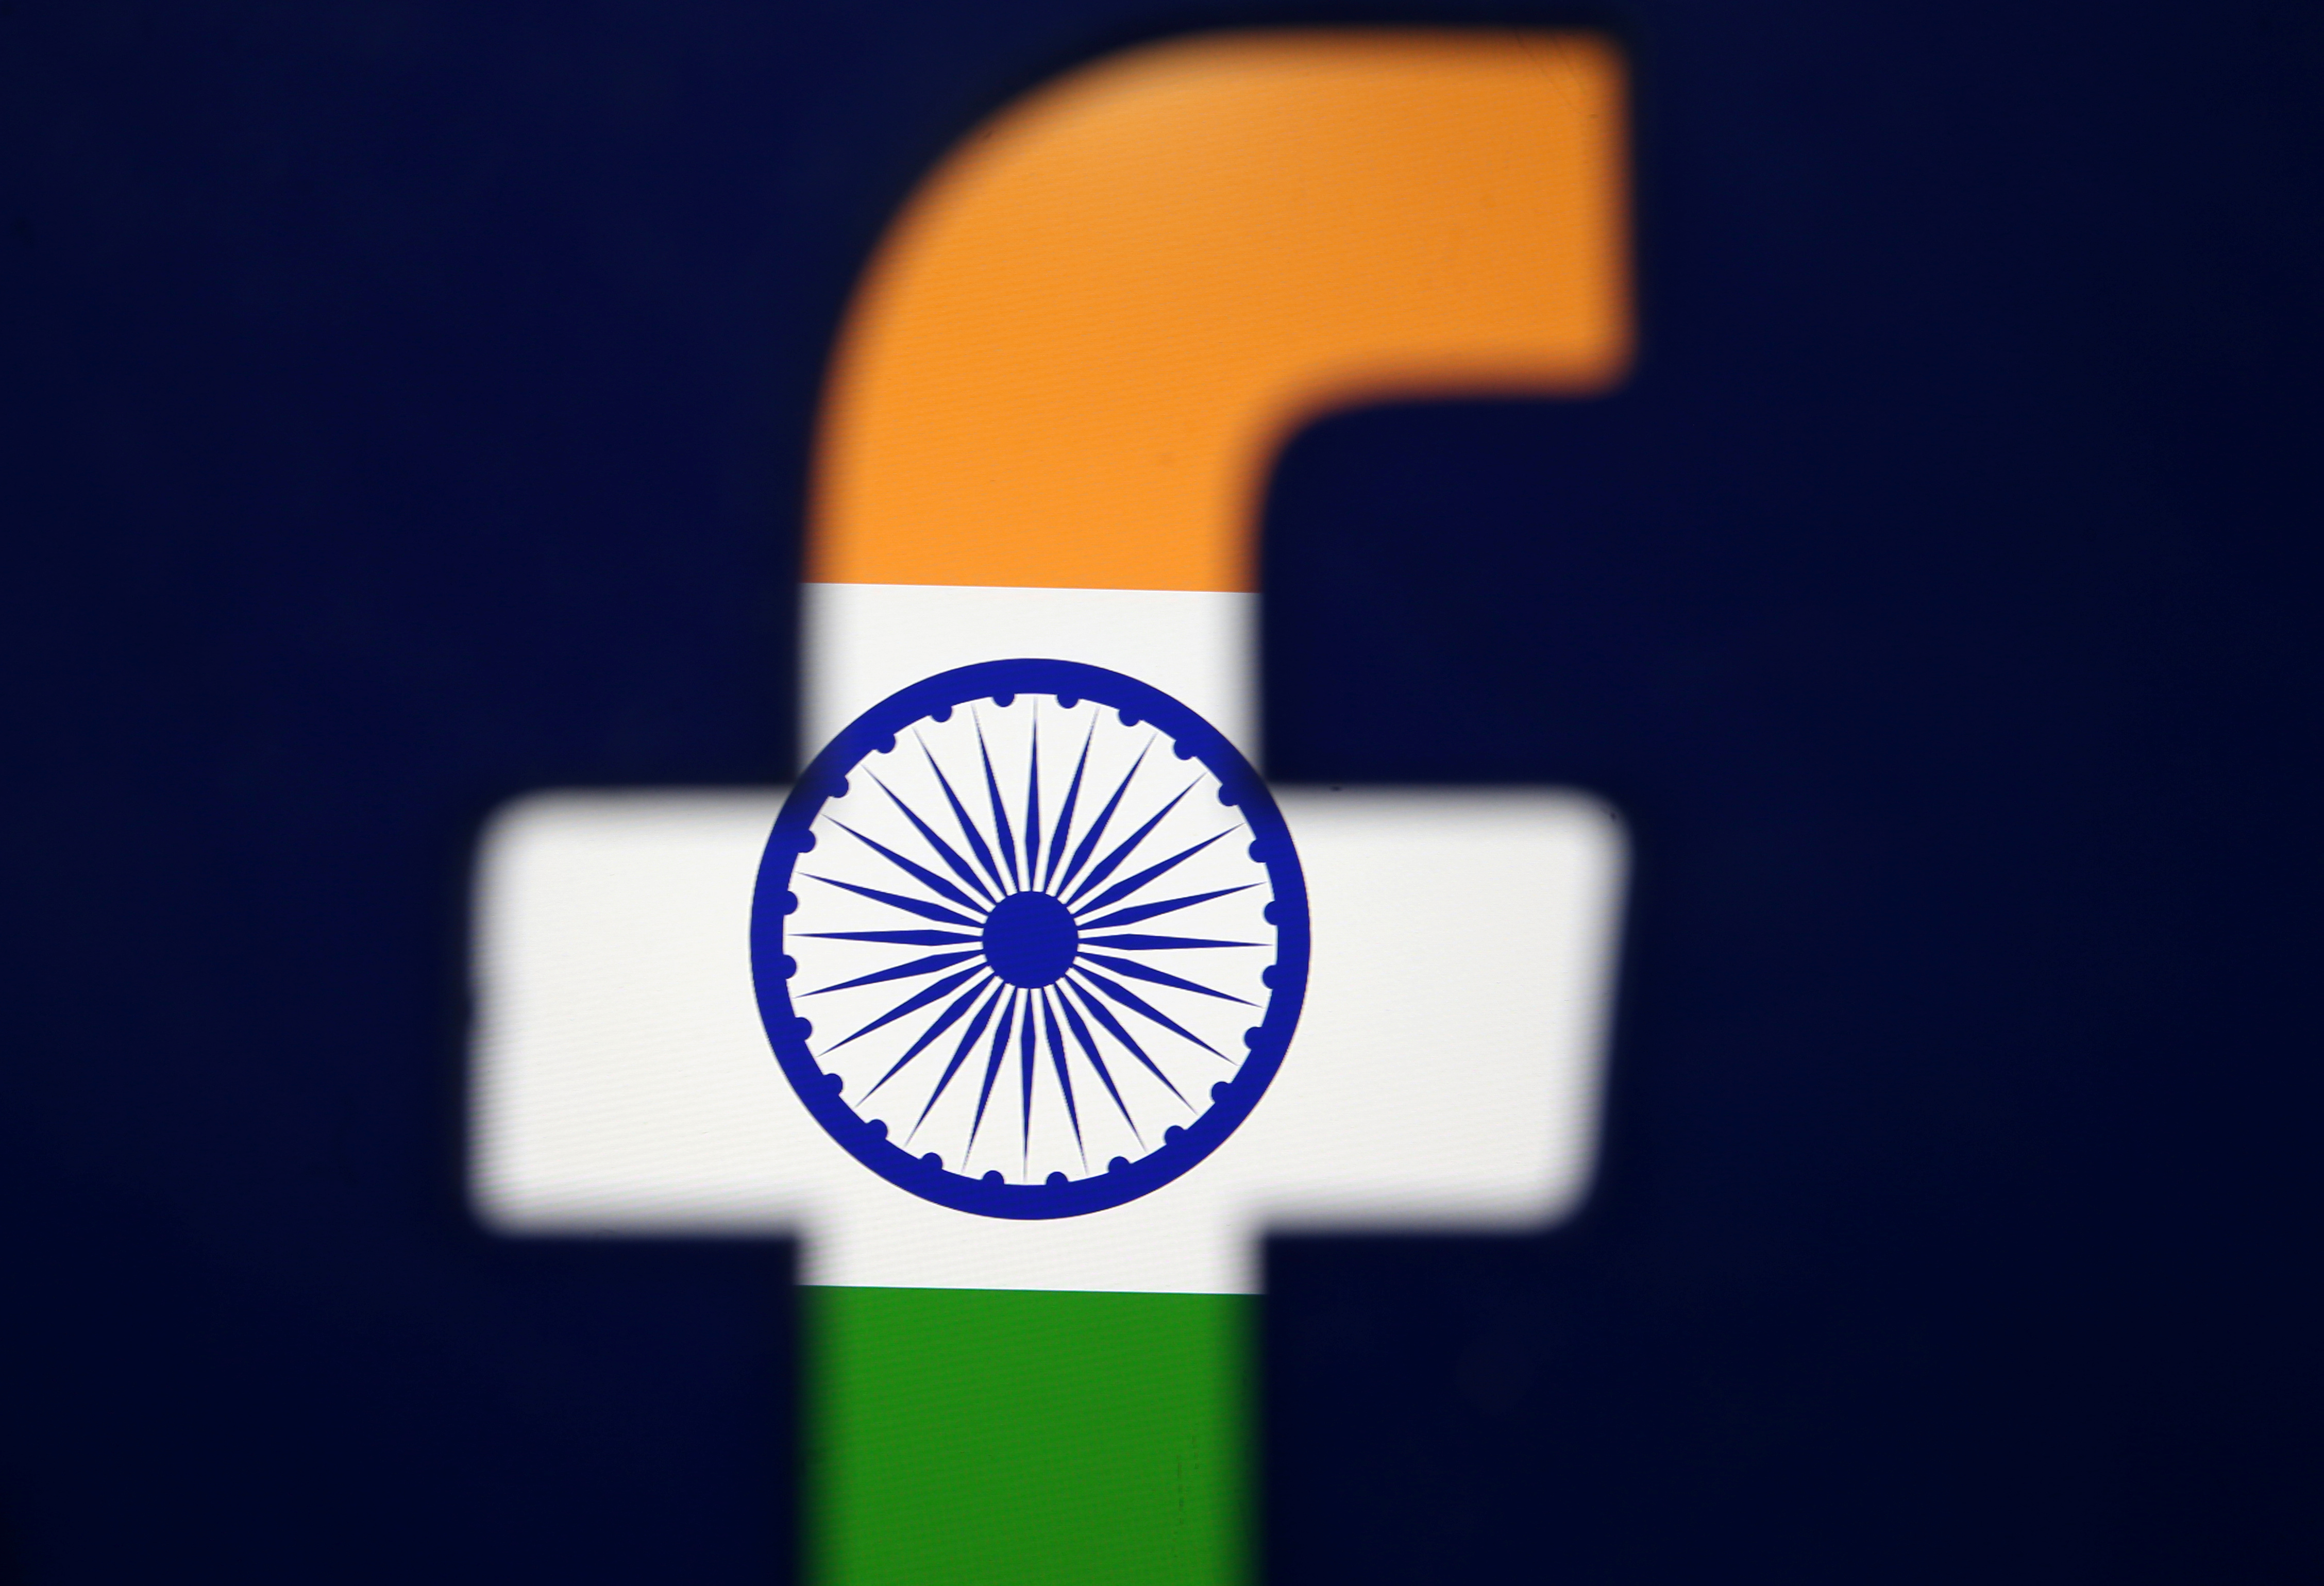 India's flag is seen through a 3D printed Facebook logo in this illustration picture